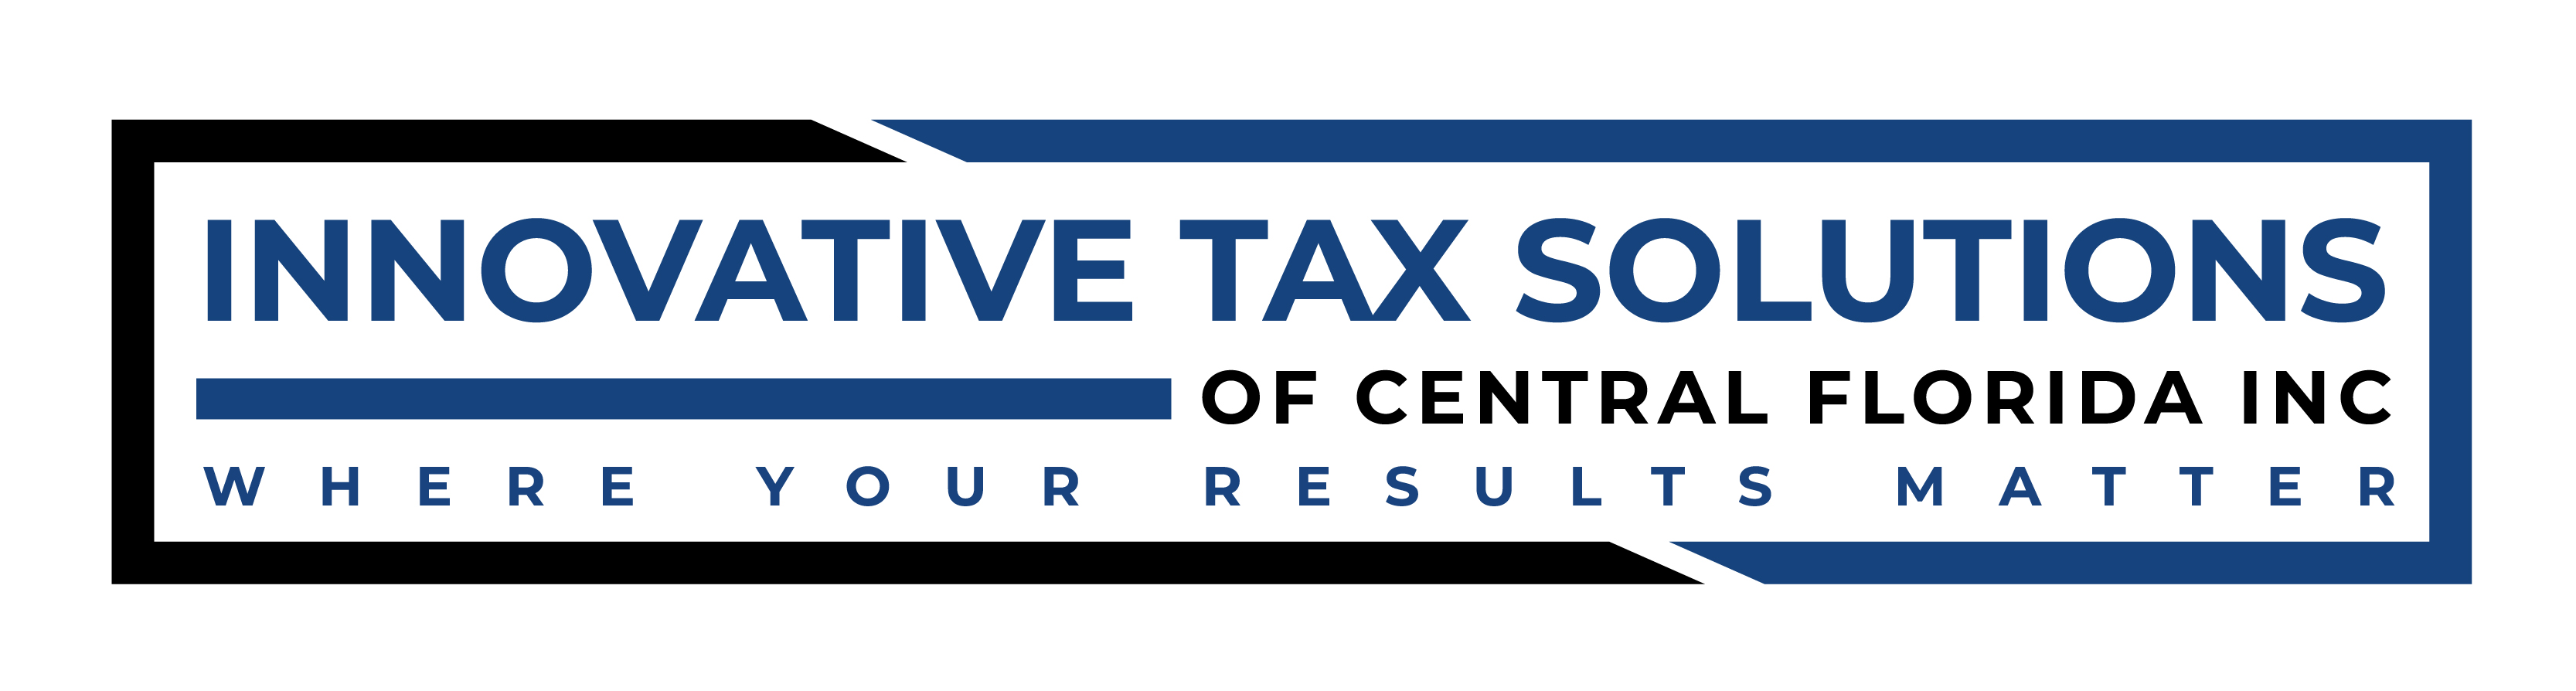 INNOVATIVE TAX SOLUTIONS OF CENTRAL FL INC